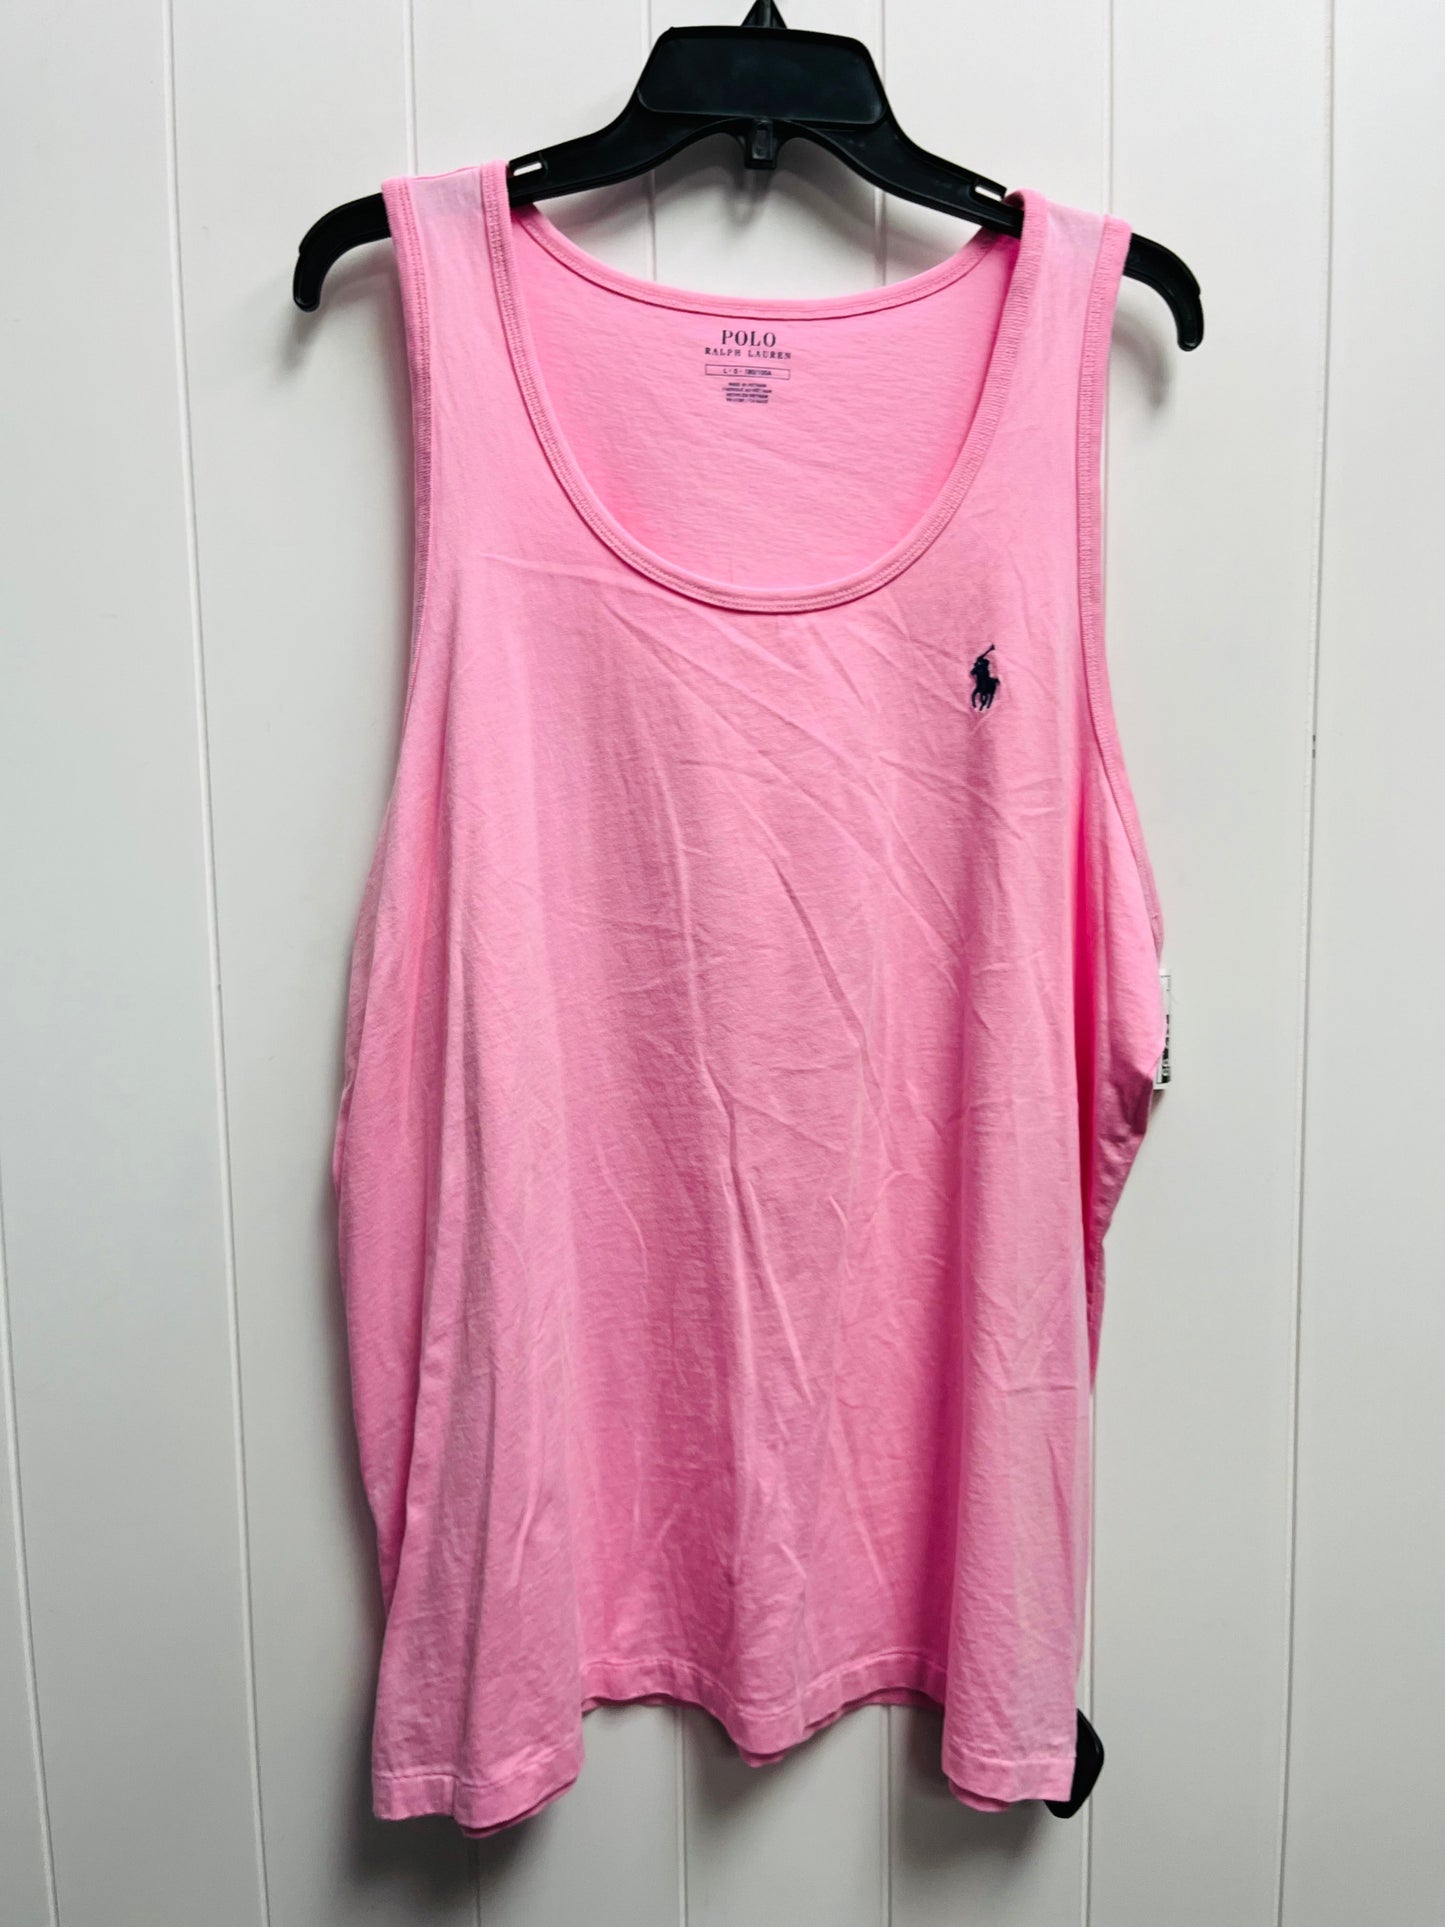 Top Sleeveless Basic By Polo Ralph Lauren  Size: L